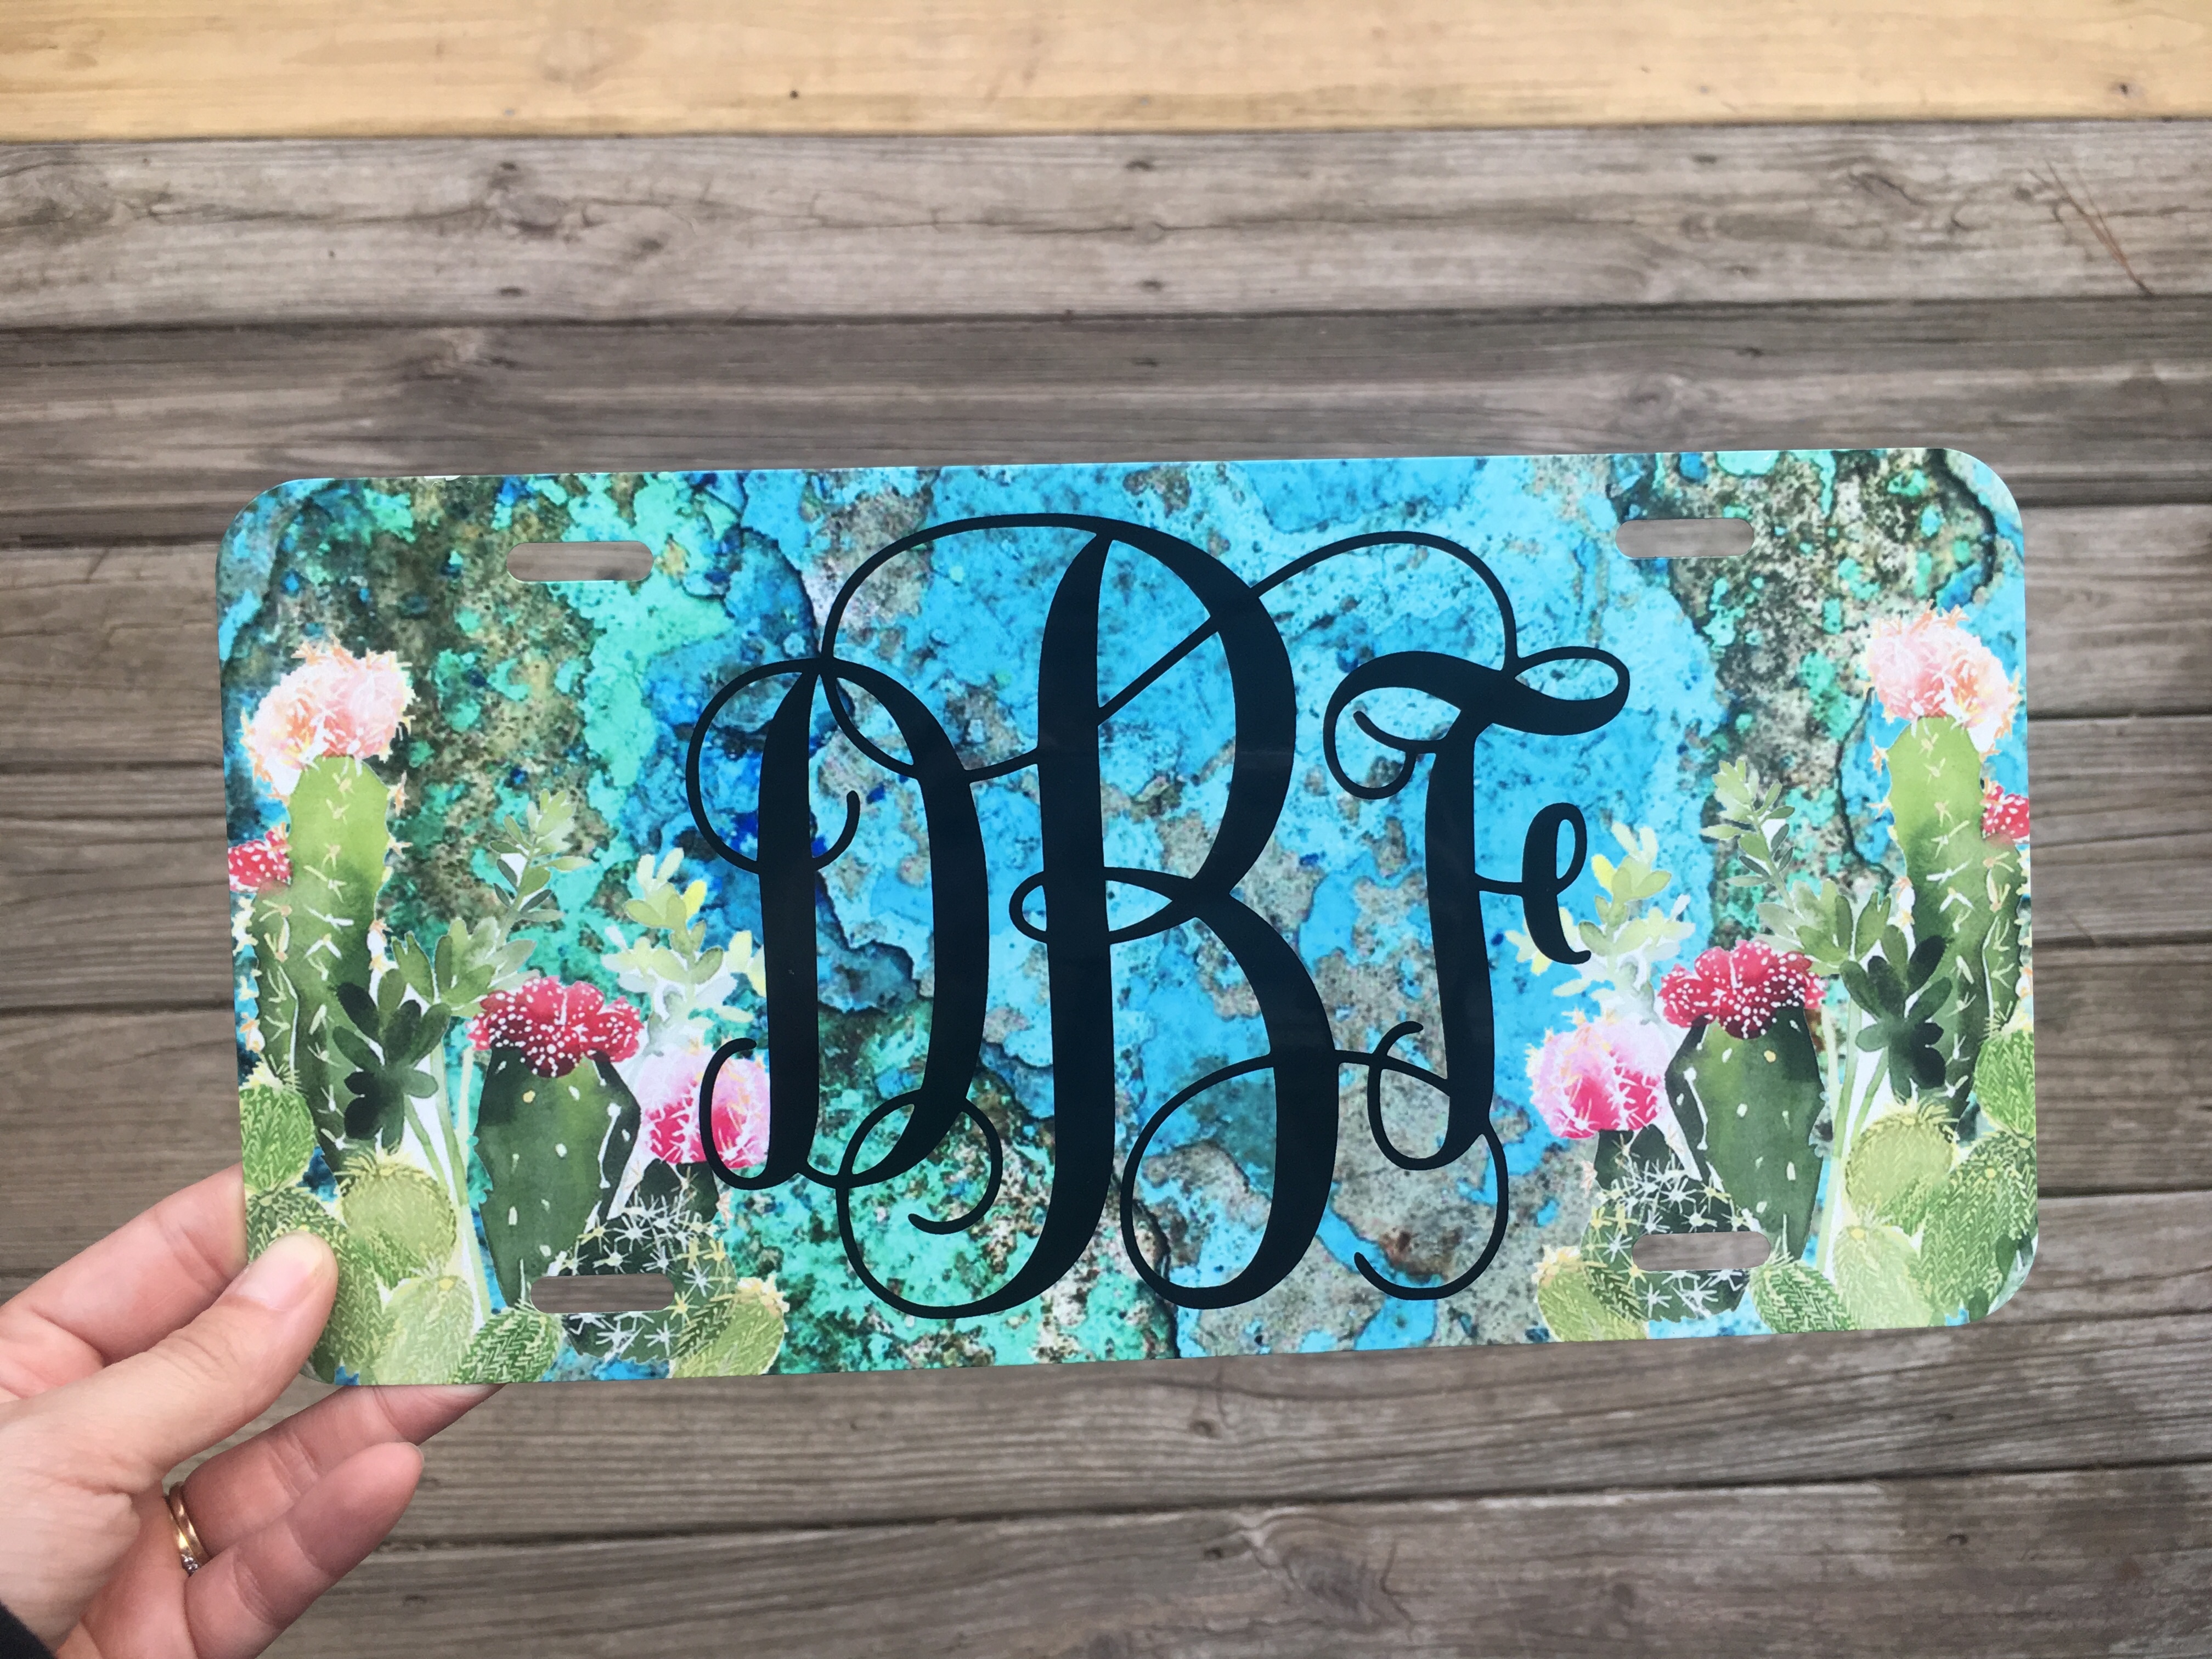 Monogram License Plate made with sublimation printing